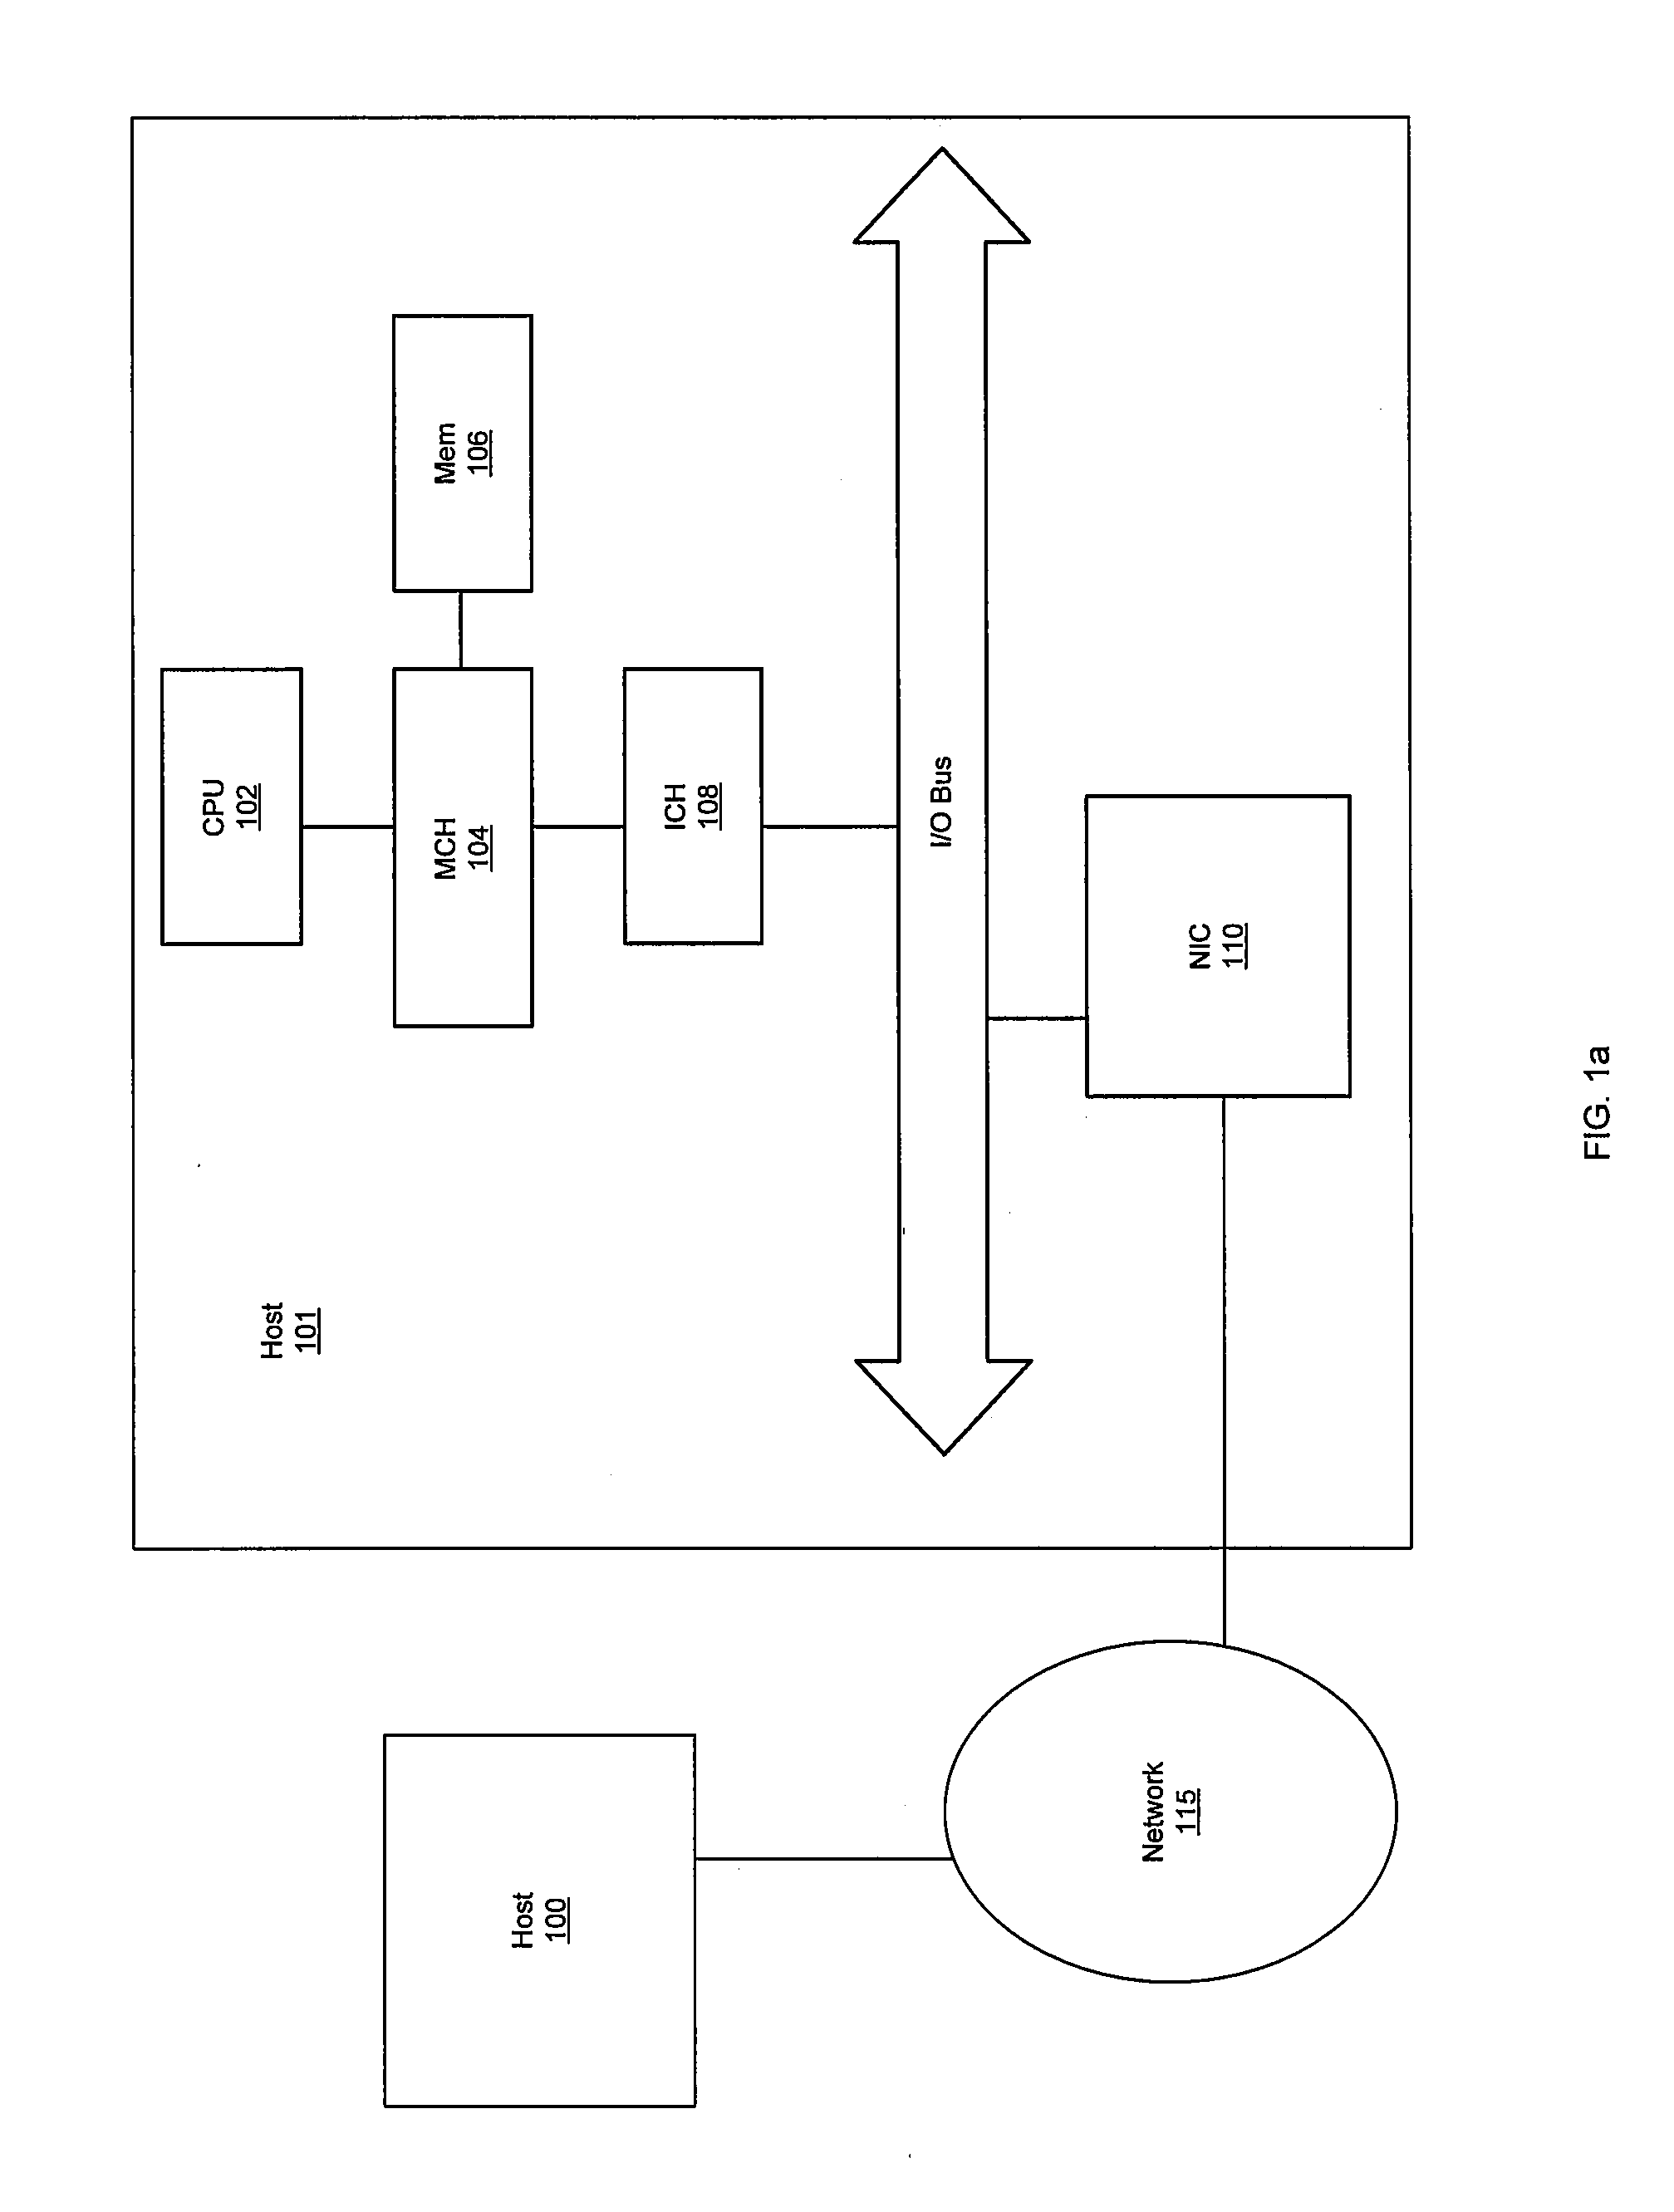 Method and System for a Fast Drop Recovery for a TCP Connection